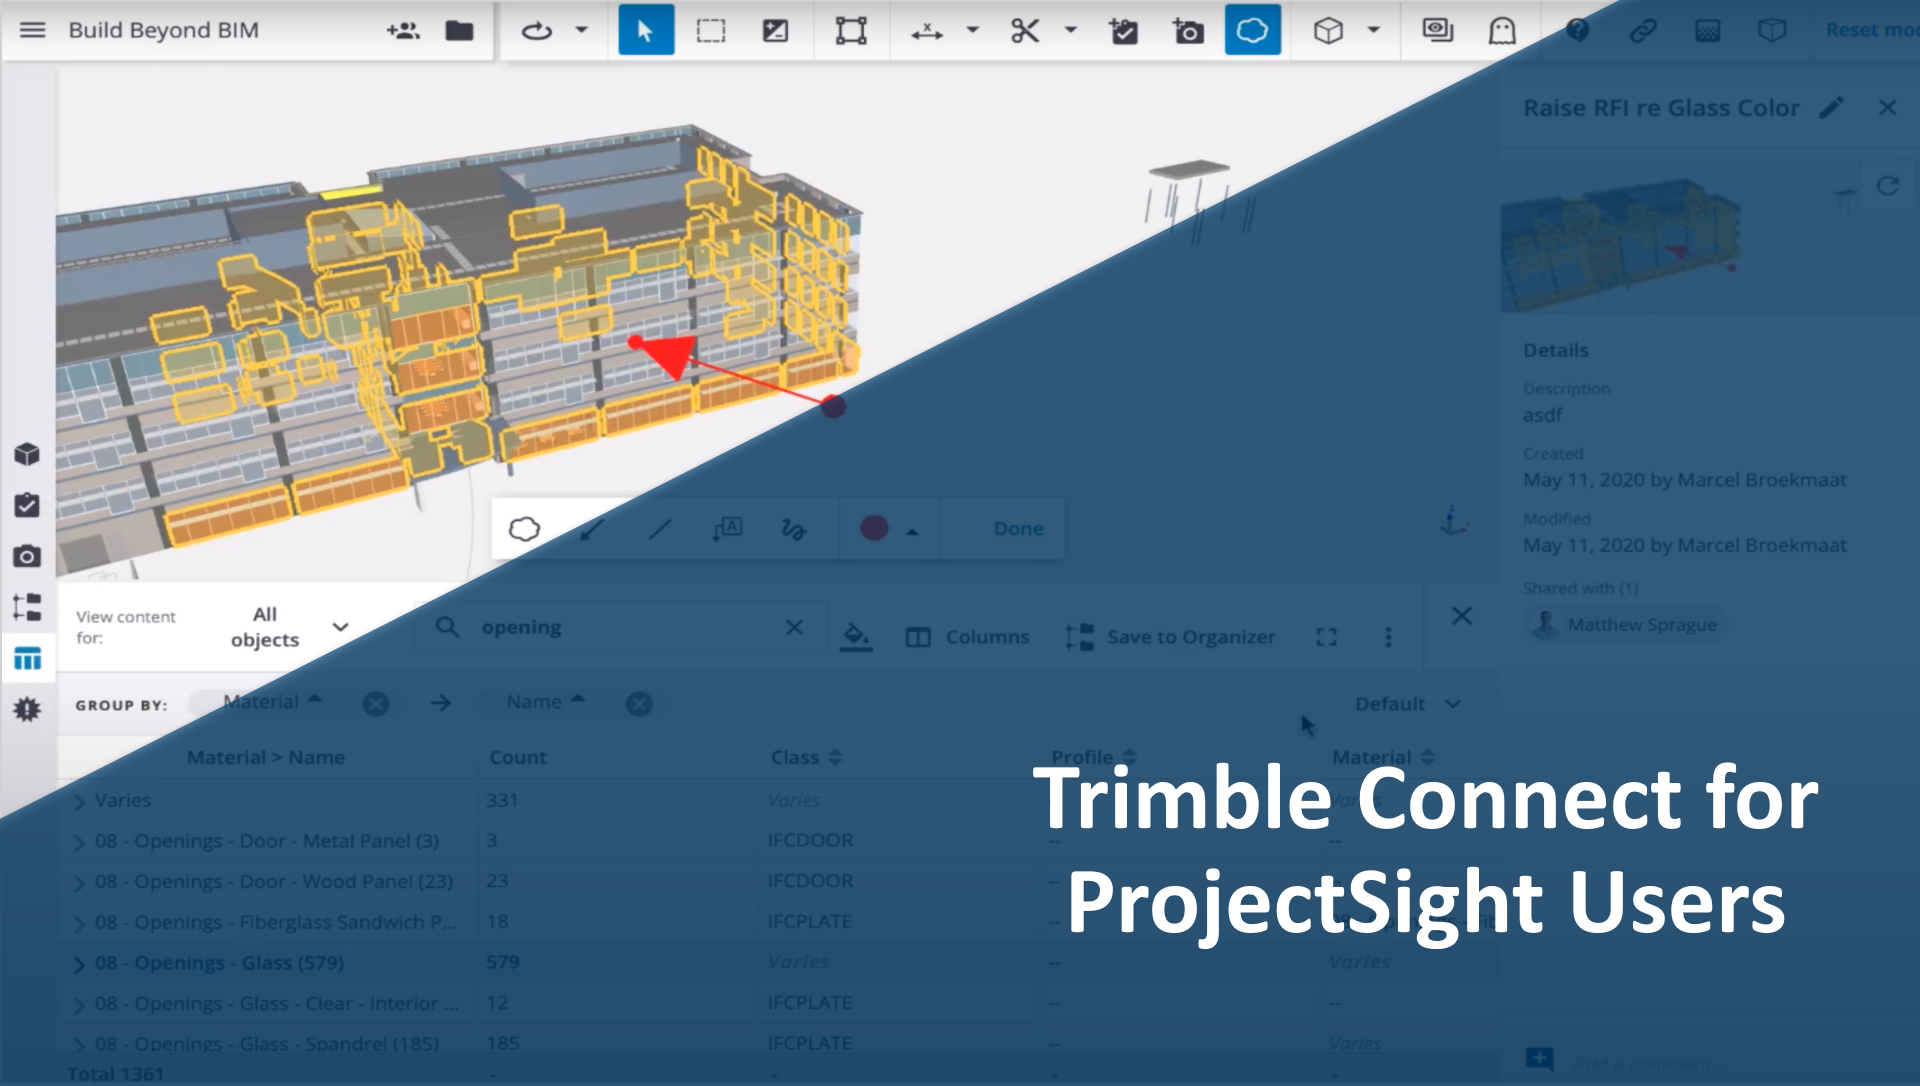 Trimble_Connect_for_ProjectSight_Users_Thumb